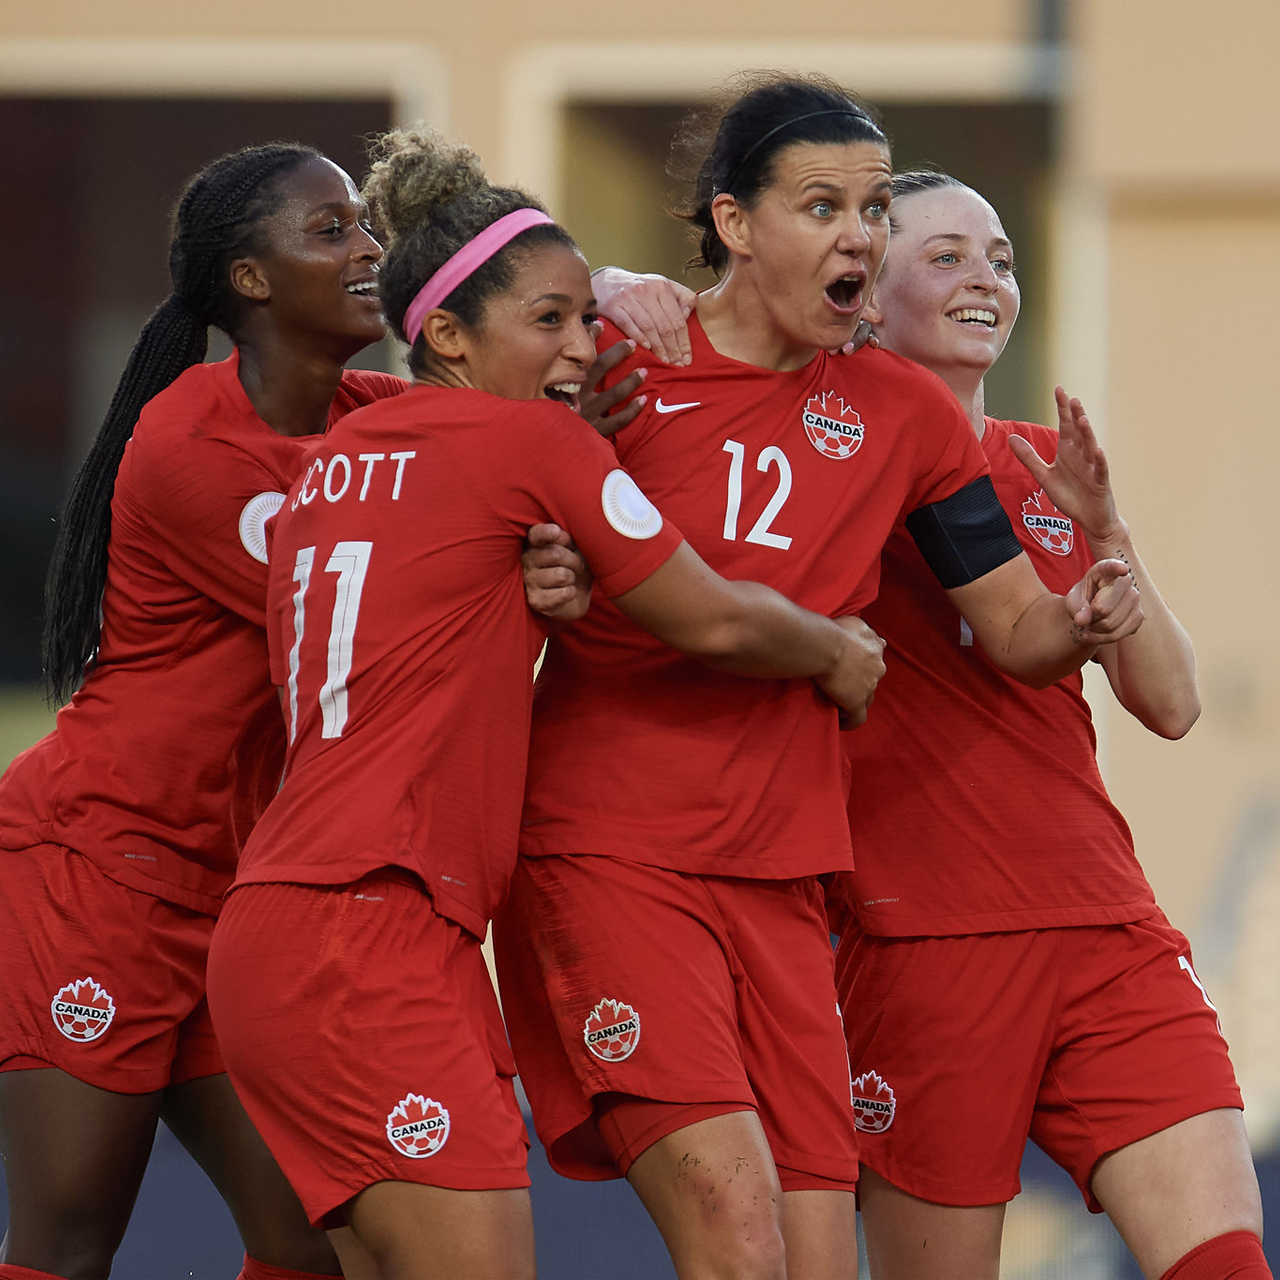 Canada Soccer women's team hugging and celebrating